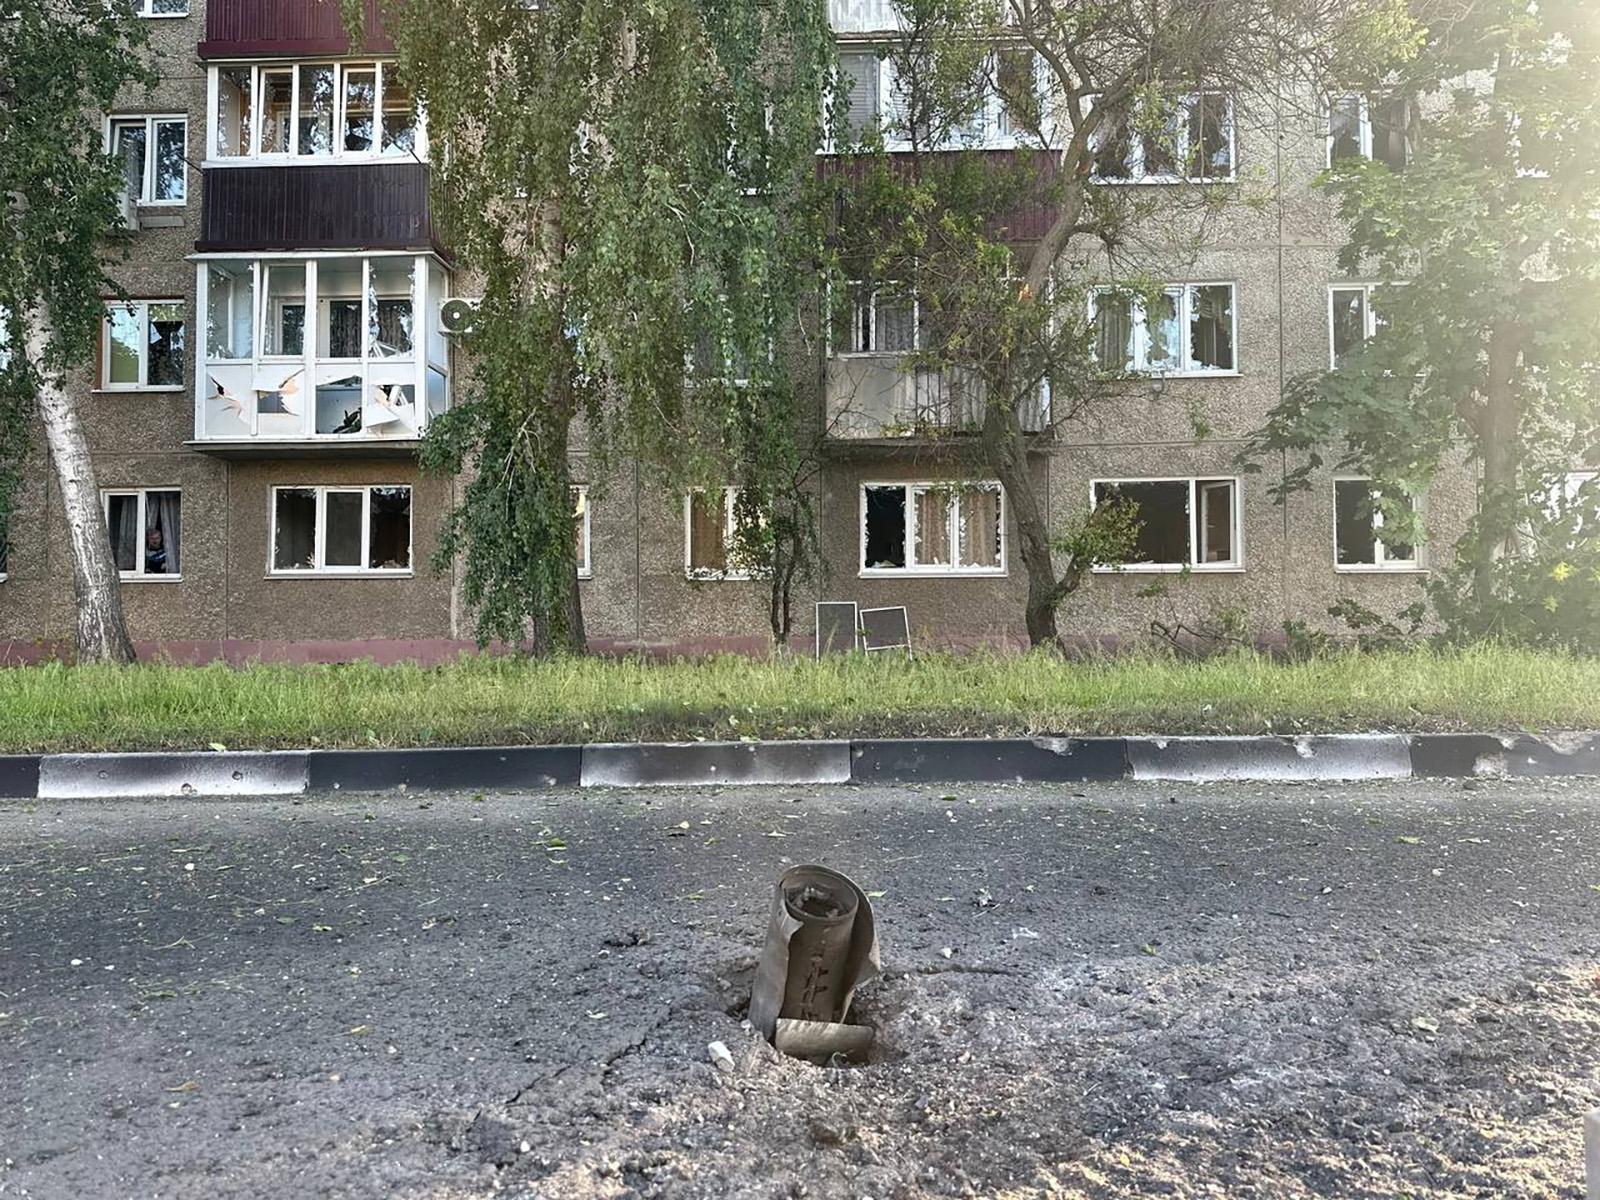 A view shows ammunition casing in a damaged street following purported shelling by Ukrainian forces in the town of Shebekino, Belgorod region, in this image released by the region's governor, on May 31.